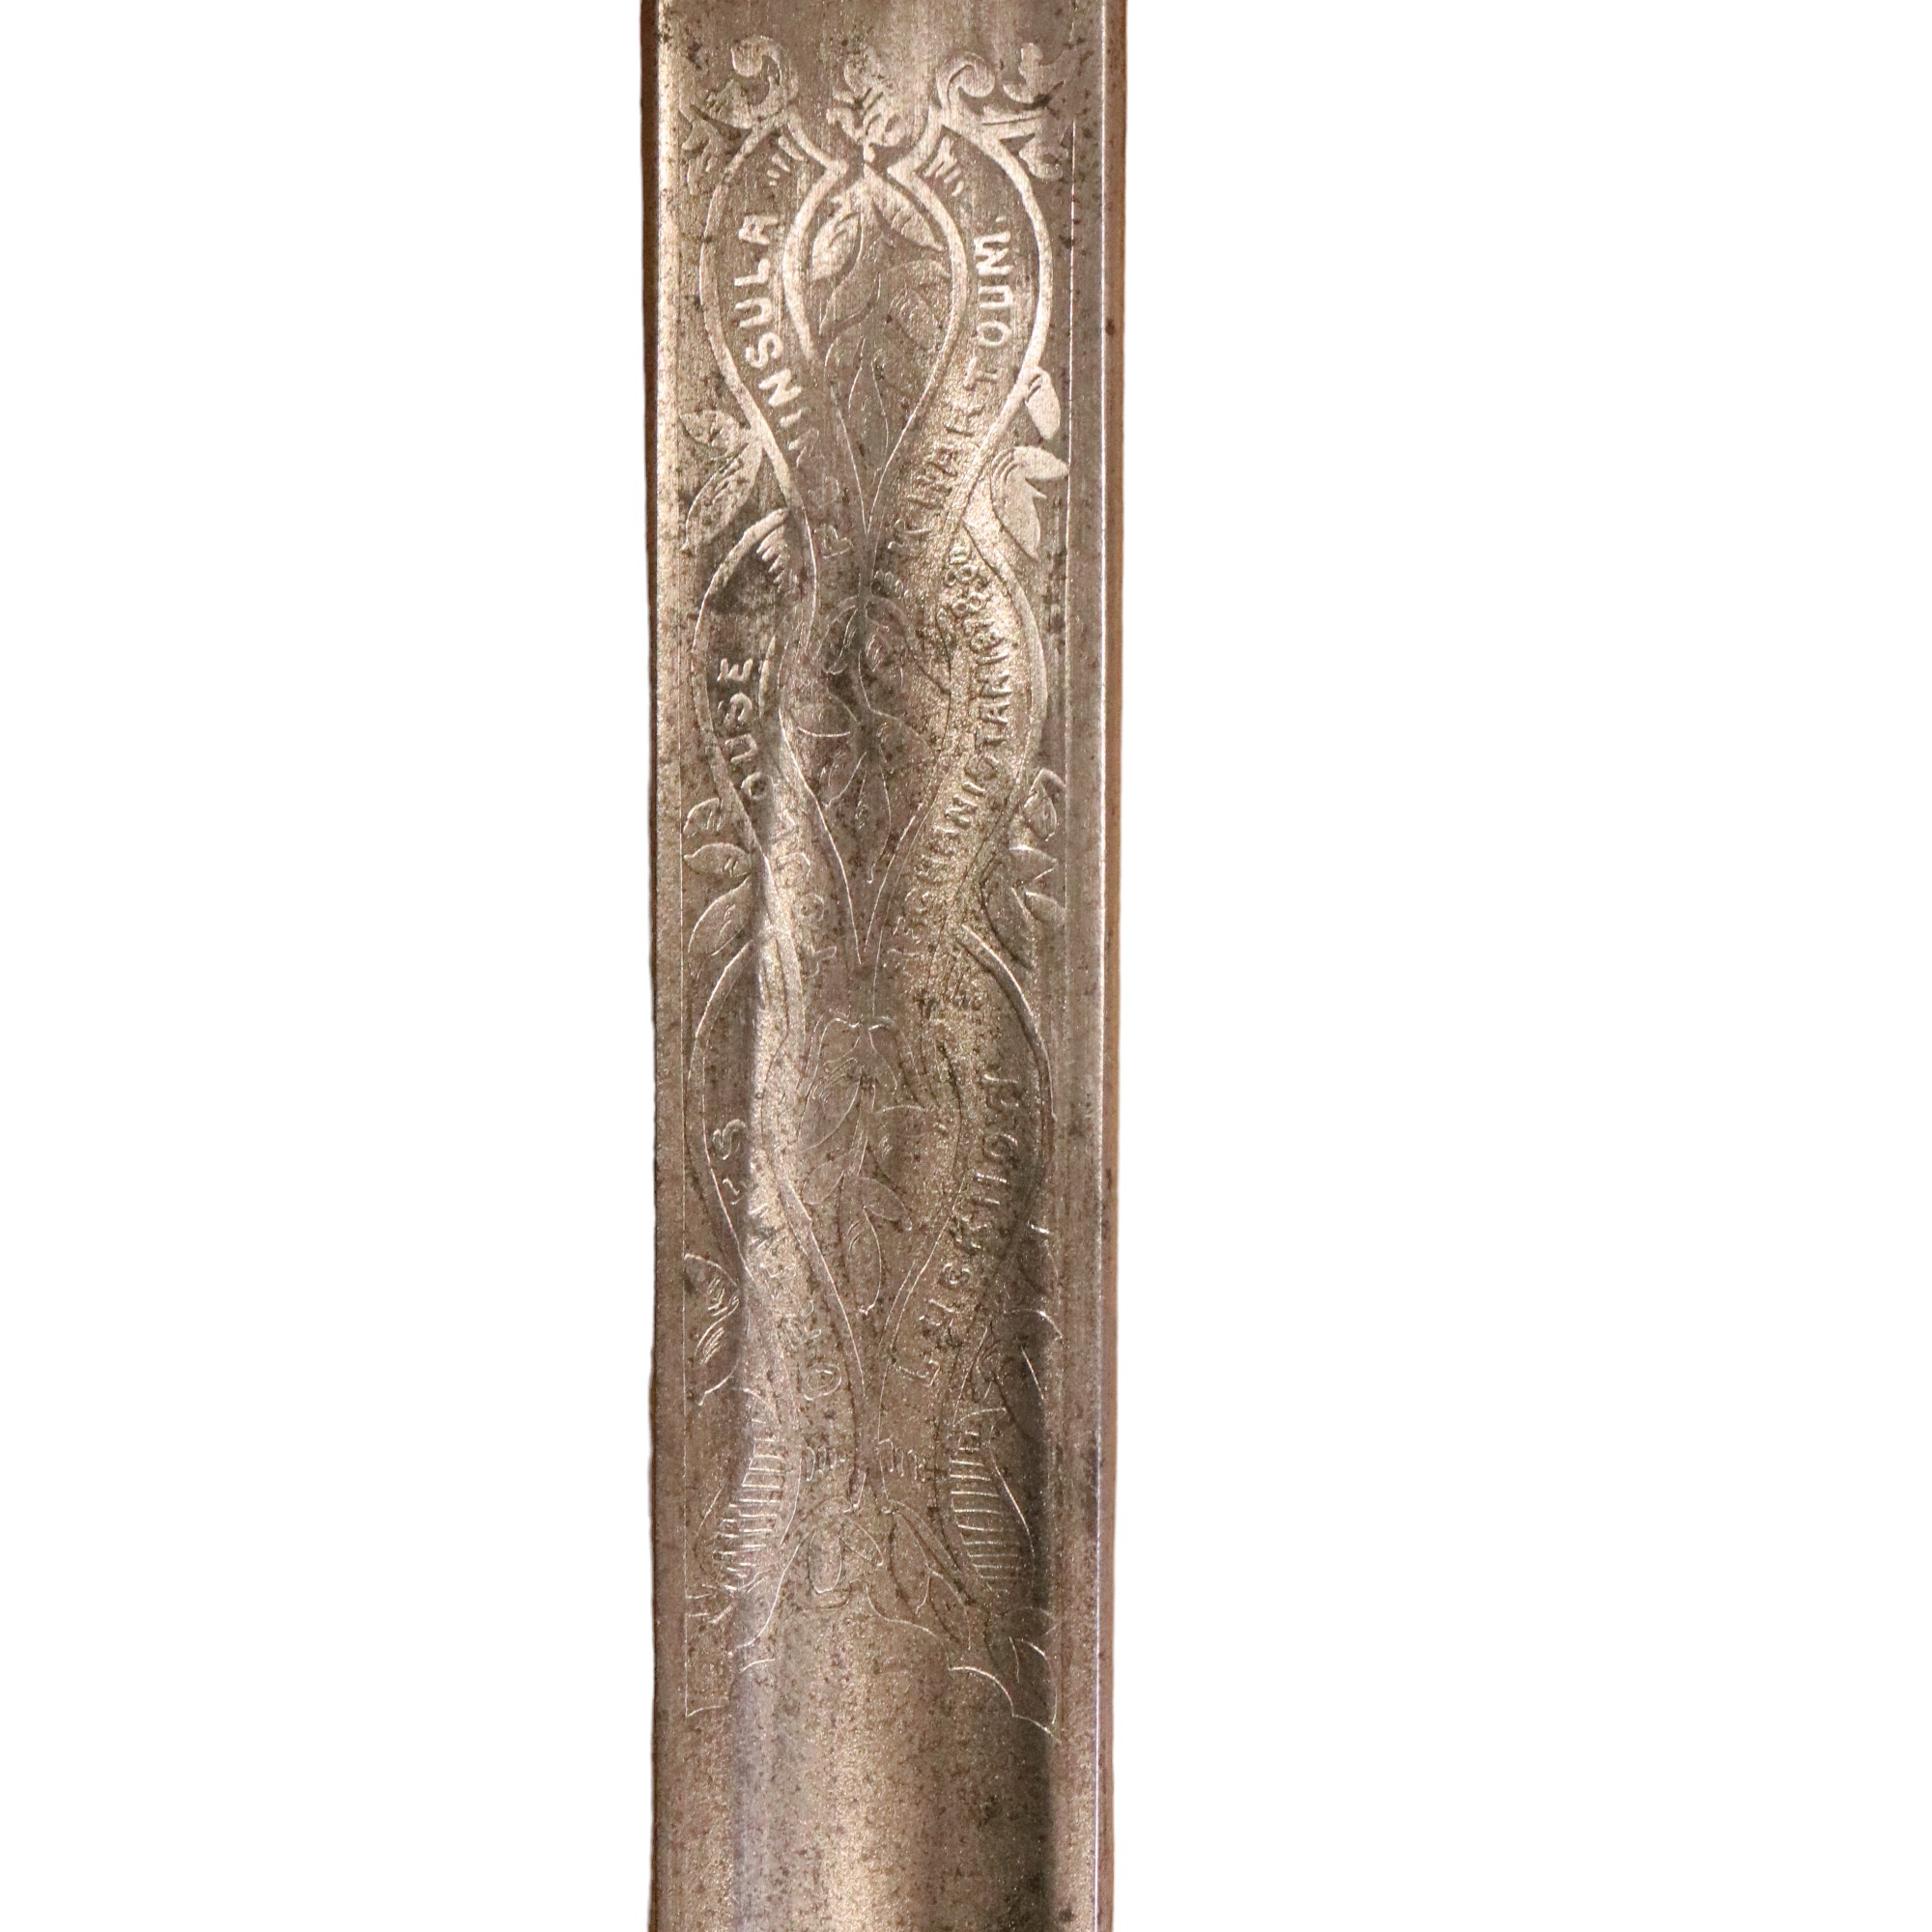 A Victorian / George V Pattern 1897 infantry officer's sword, by Mole, its guard incorporating a - Image 15 of 20